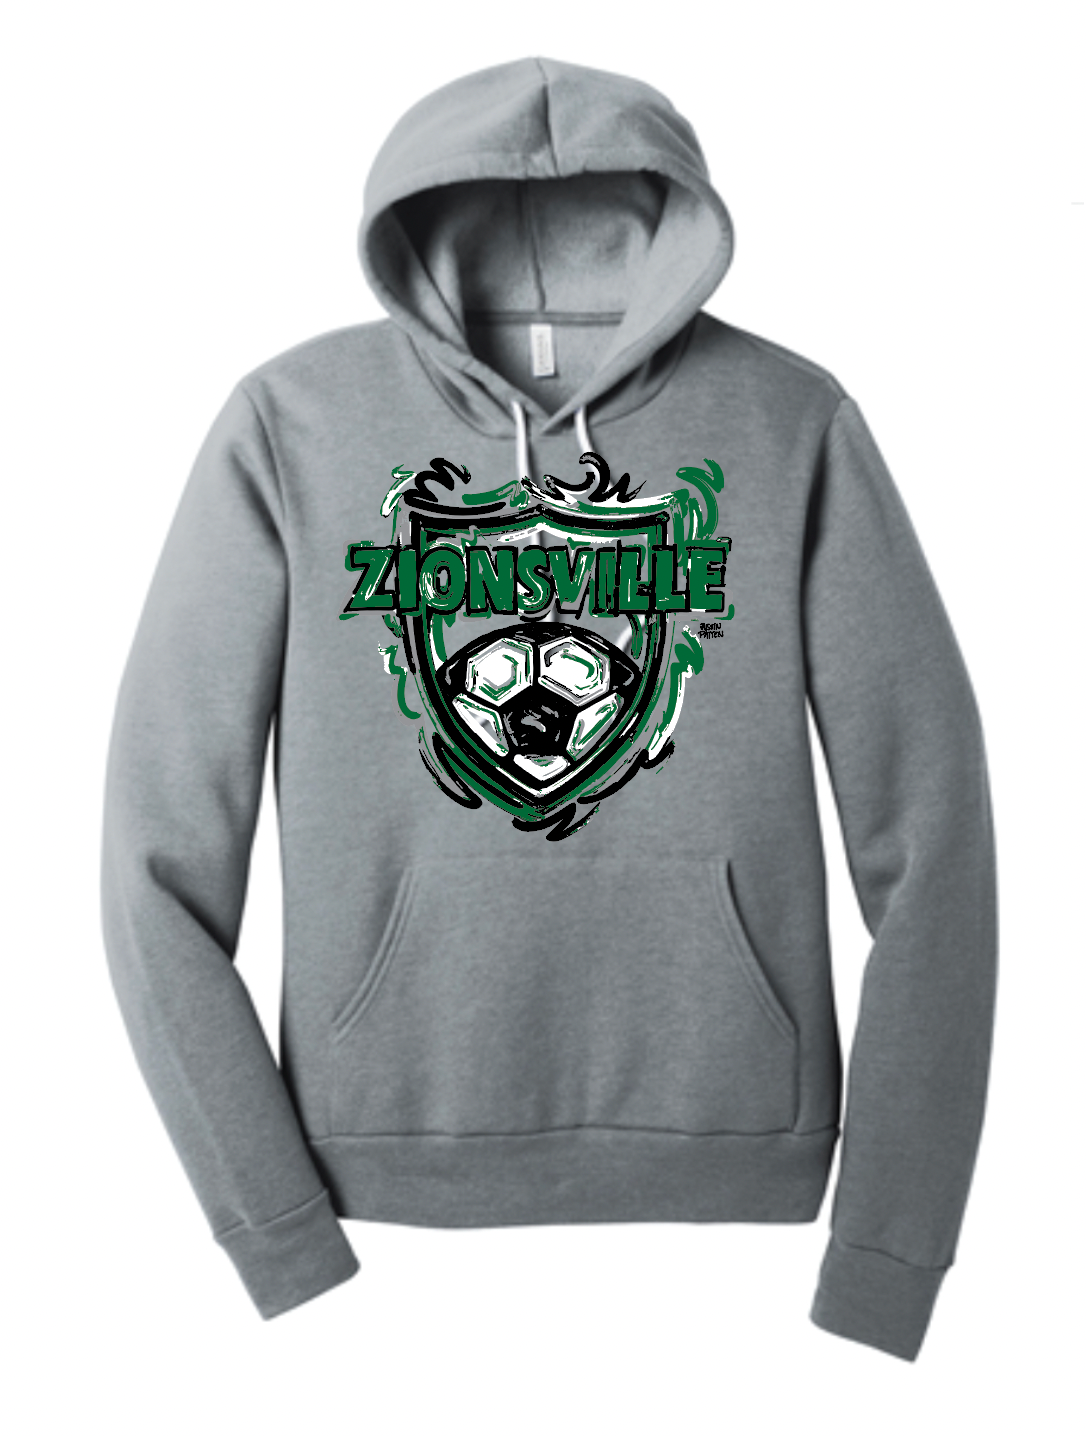 Zionsville Soccer Unisex Hoodie by Justin Patten (1 Color)